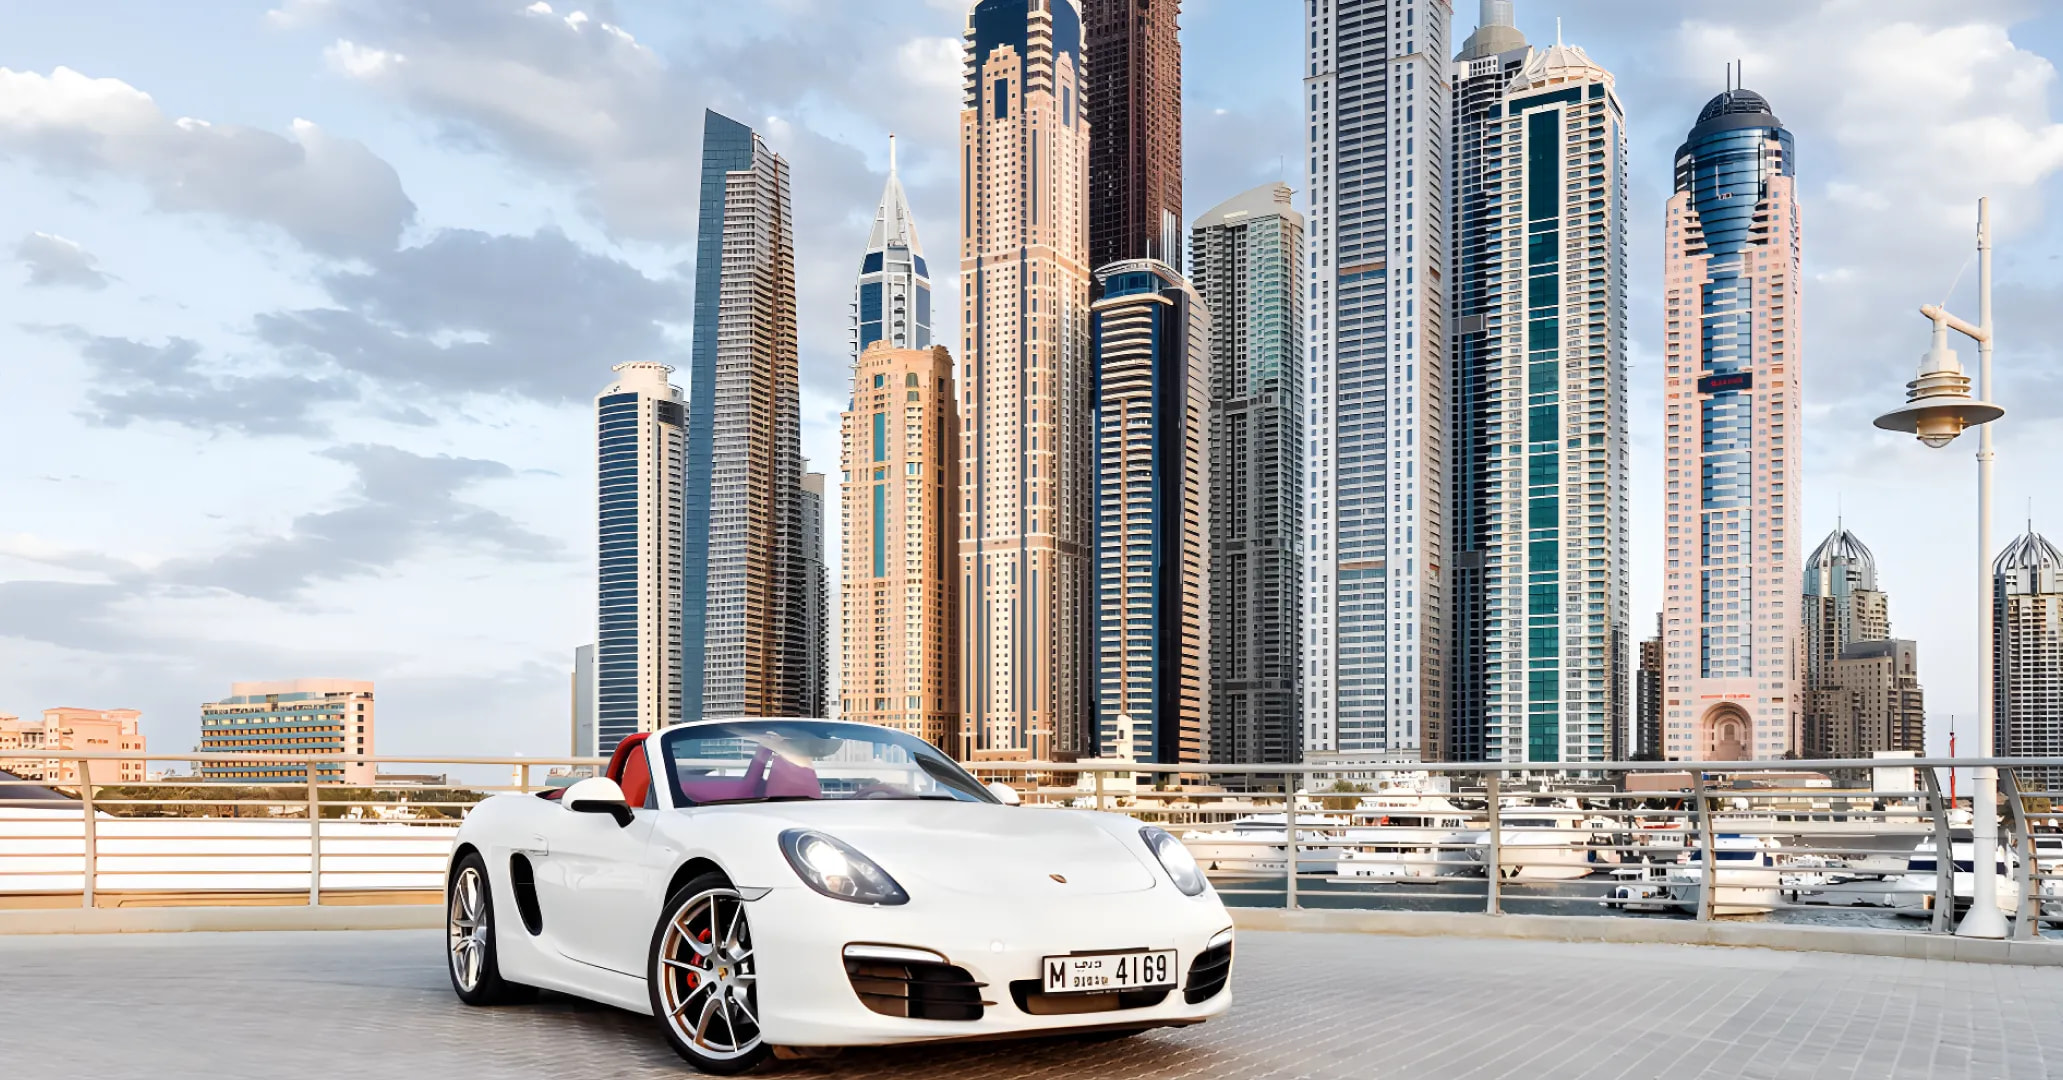 How to Quickly and Affordably Rent a Car in the UAE? Here Are 4 Simple Tips